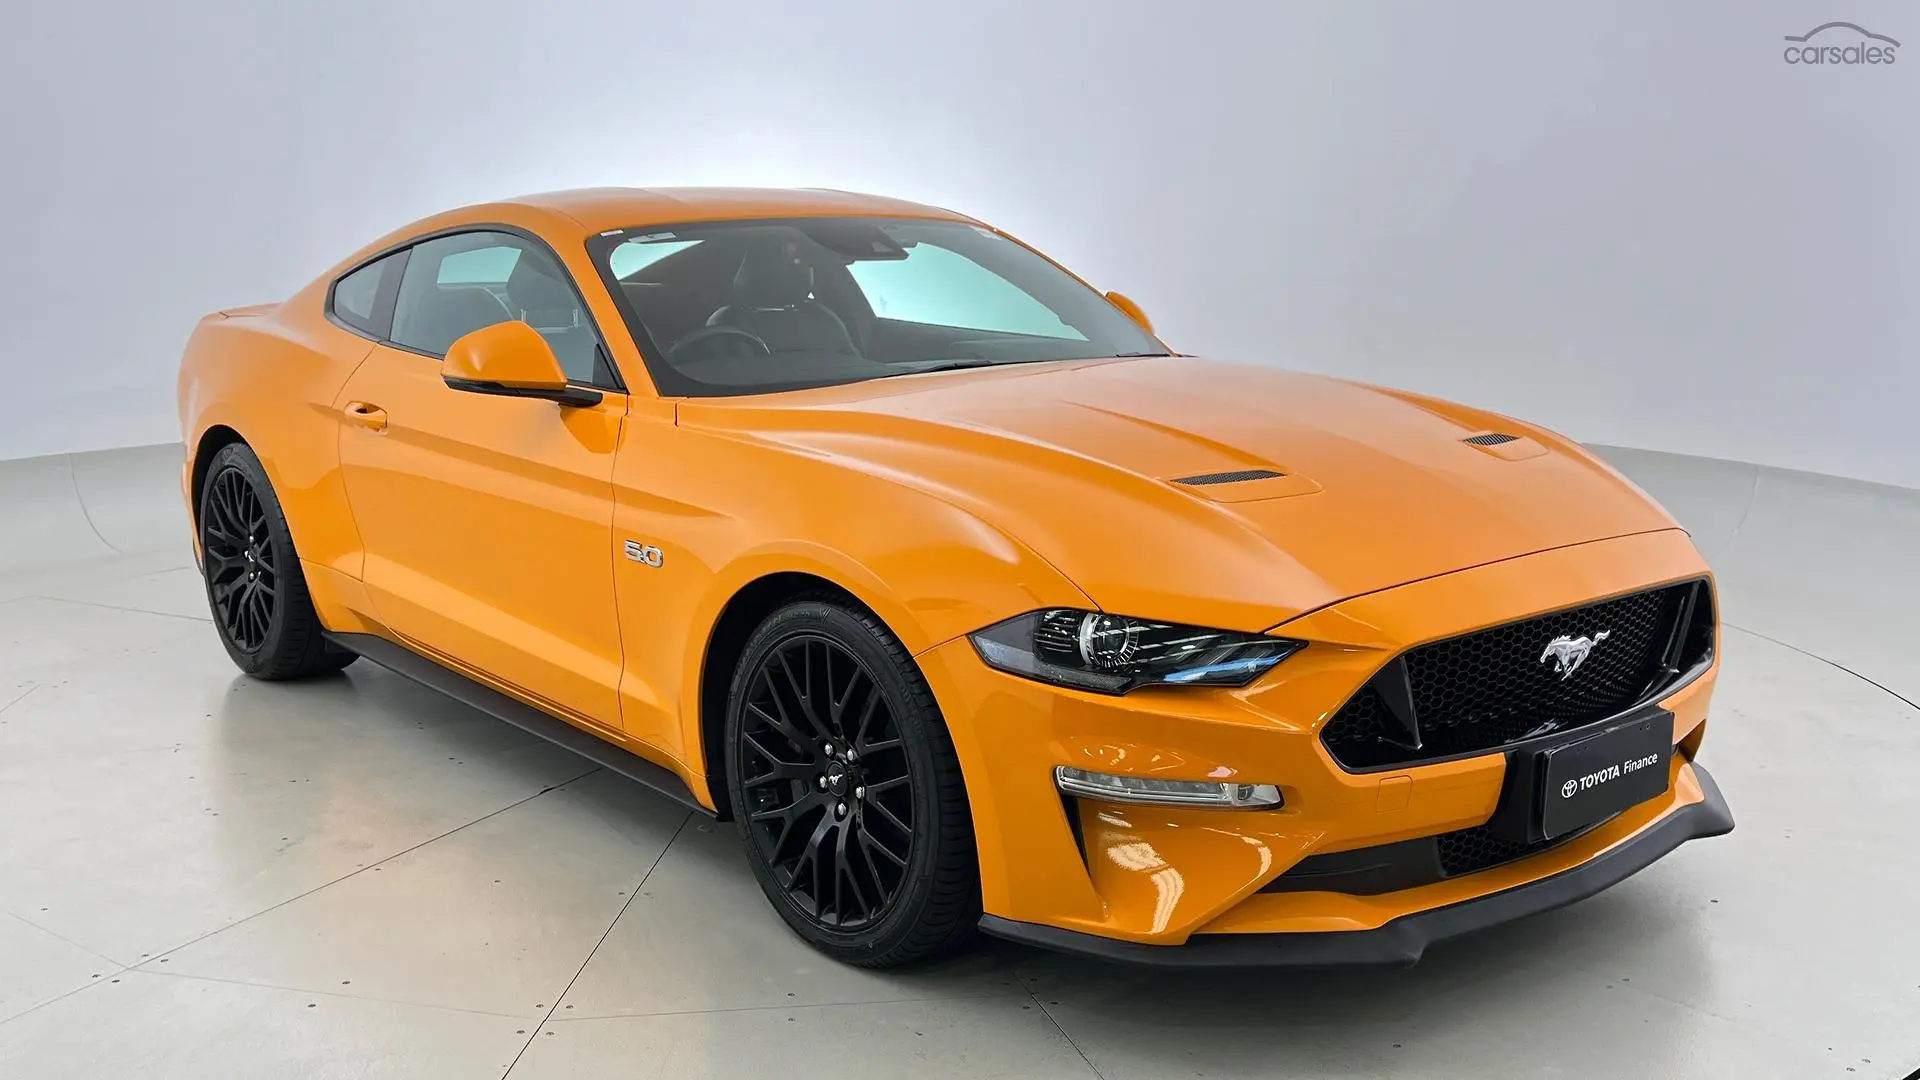 2019 Ford Mustang Image 1